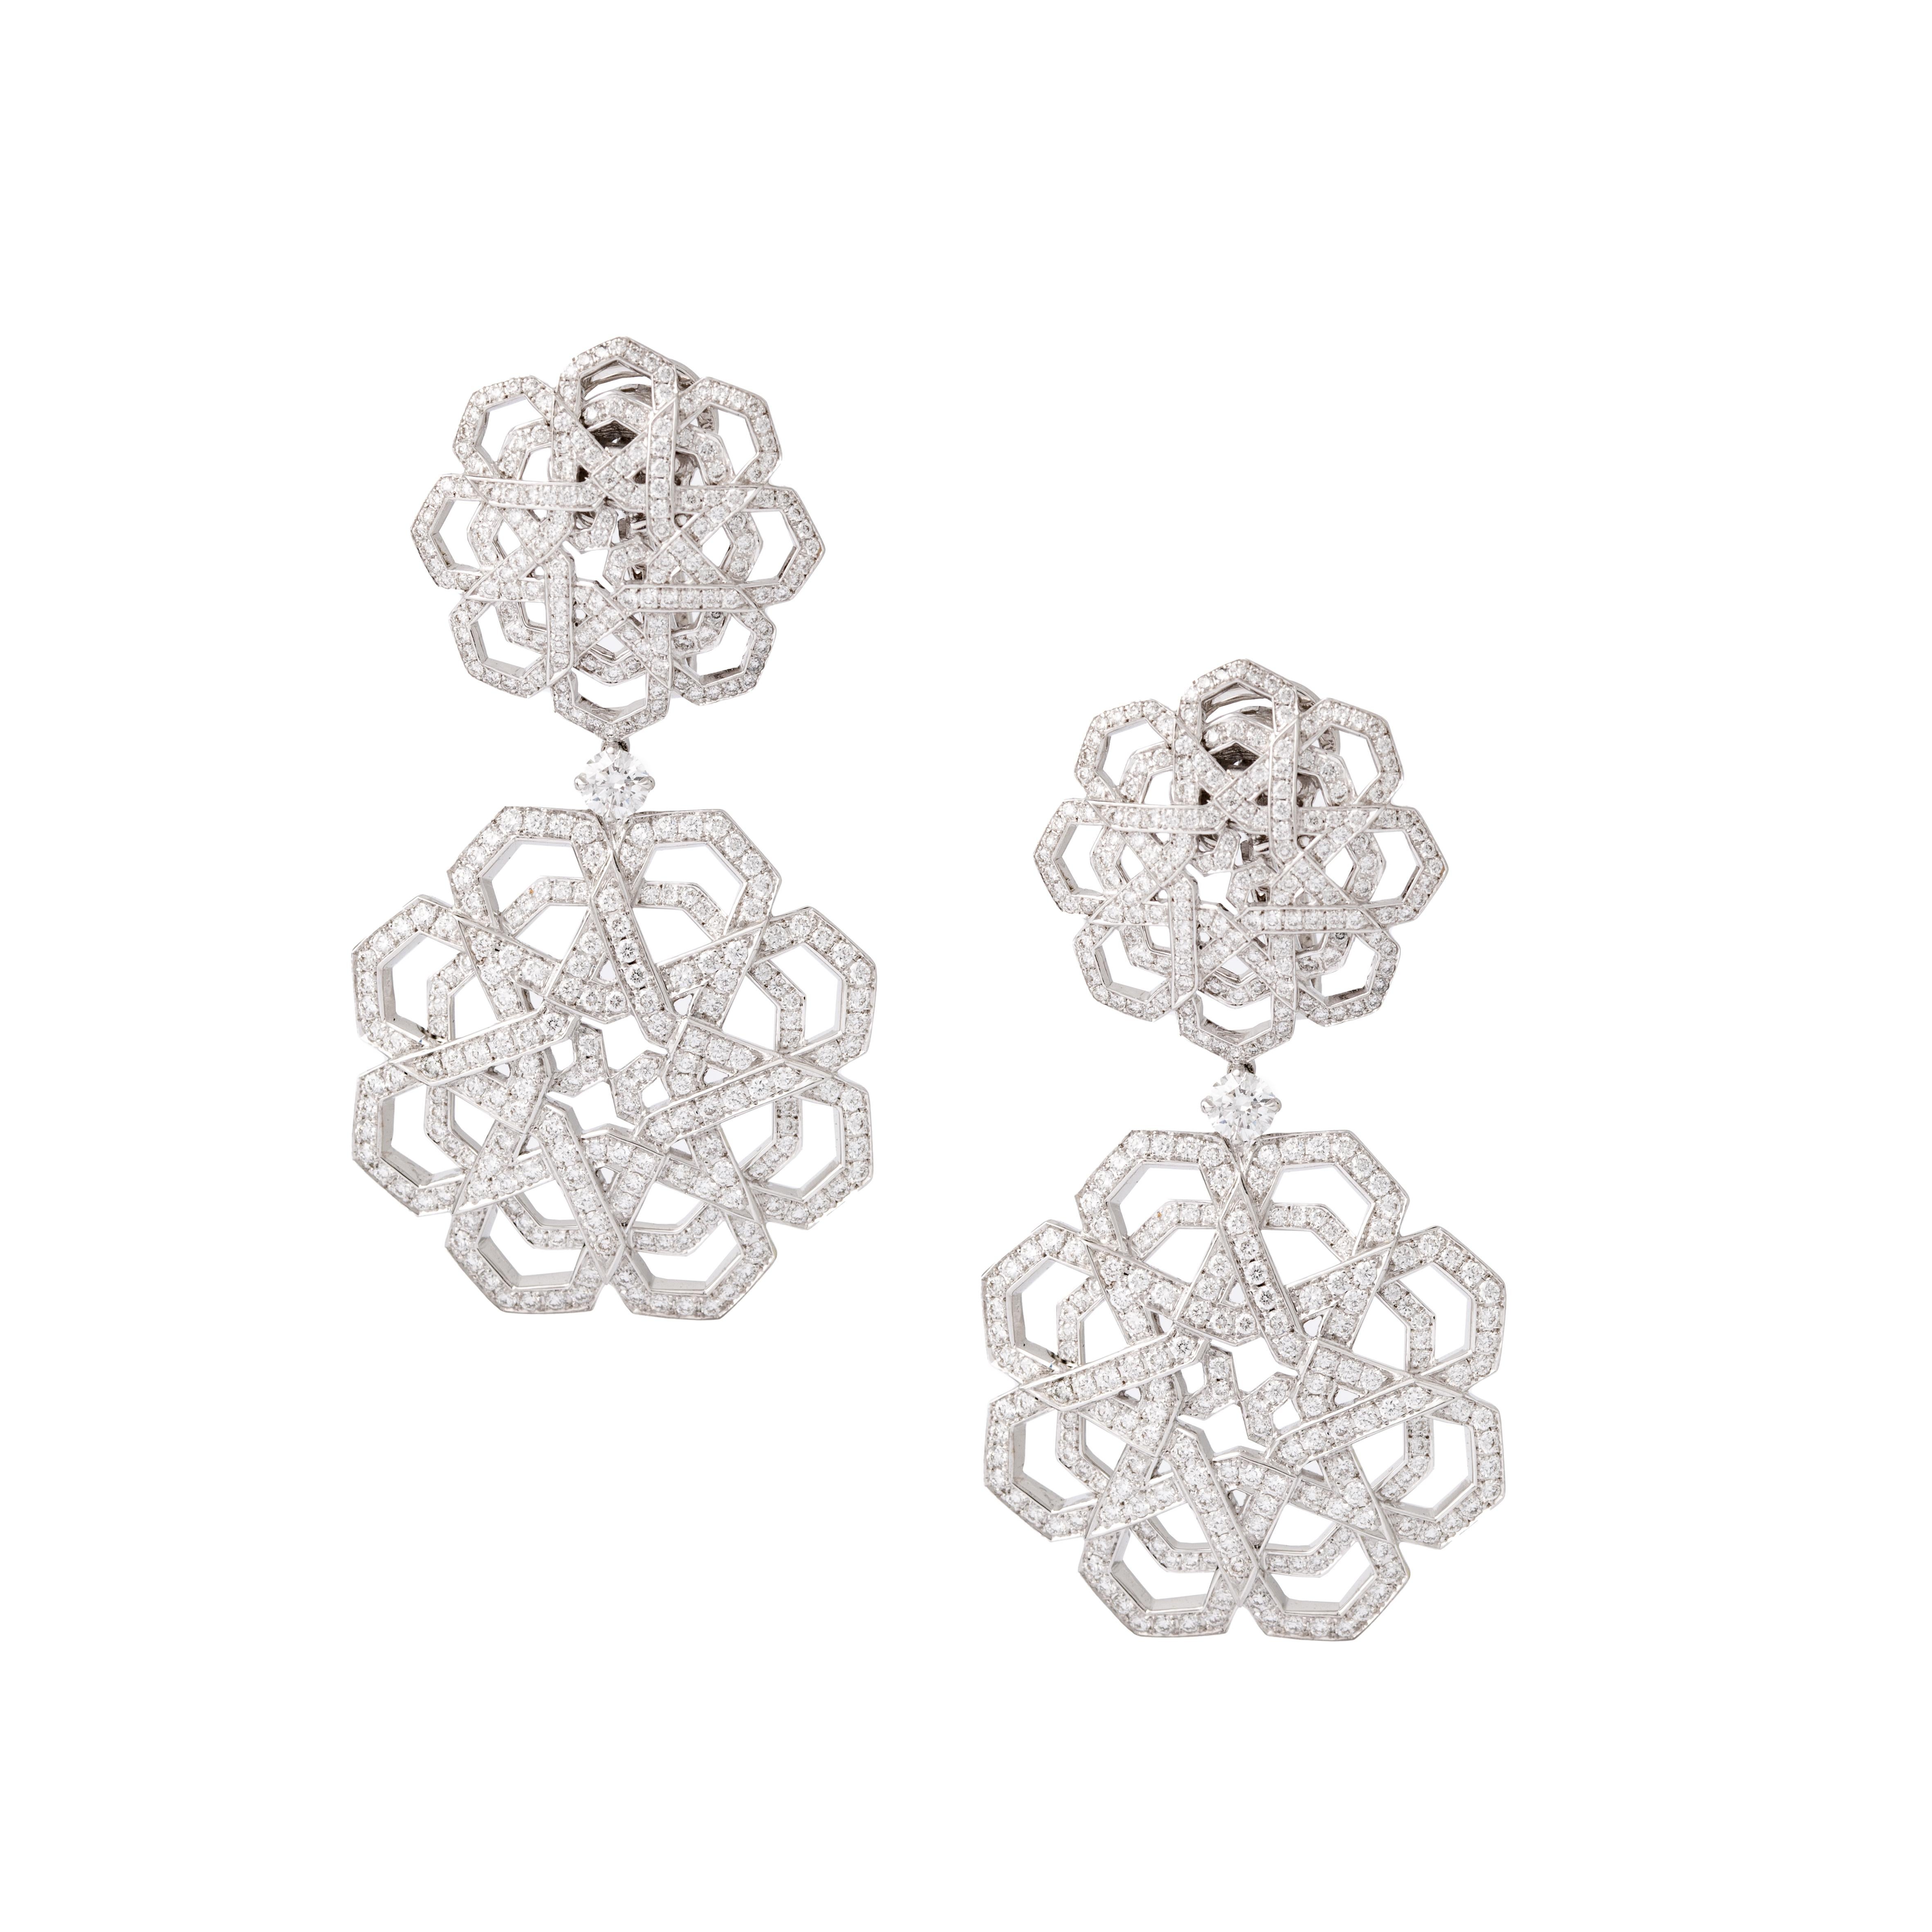 Earrings in 18kt white gold set with 698 diamonds 2.77 cts.

Length: 4.70 centimeters (1.85 inches).

Maximum Width :2.80 centimeters (1.10 inches).

Total weight: 19.89 grams.